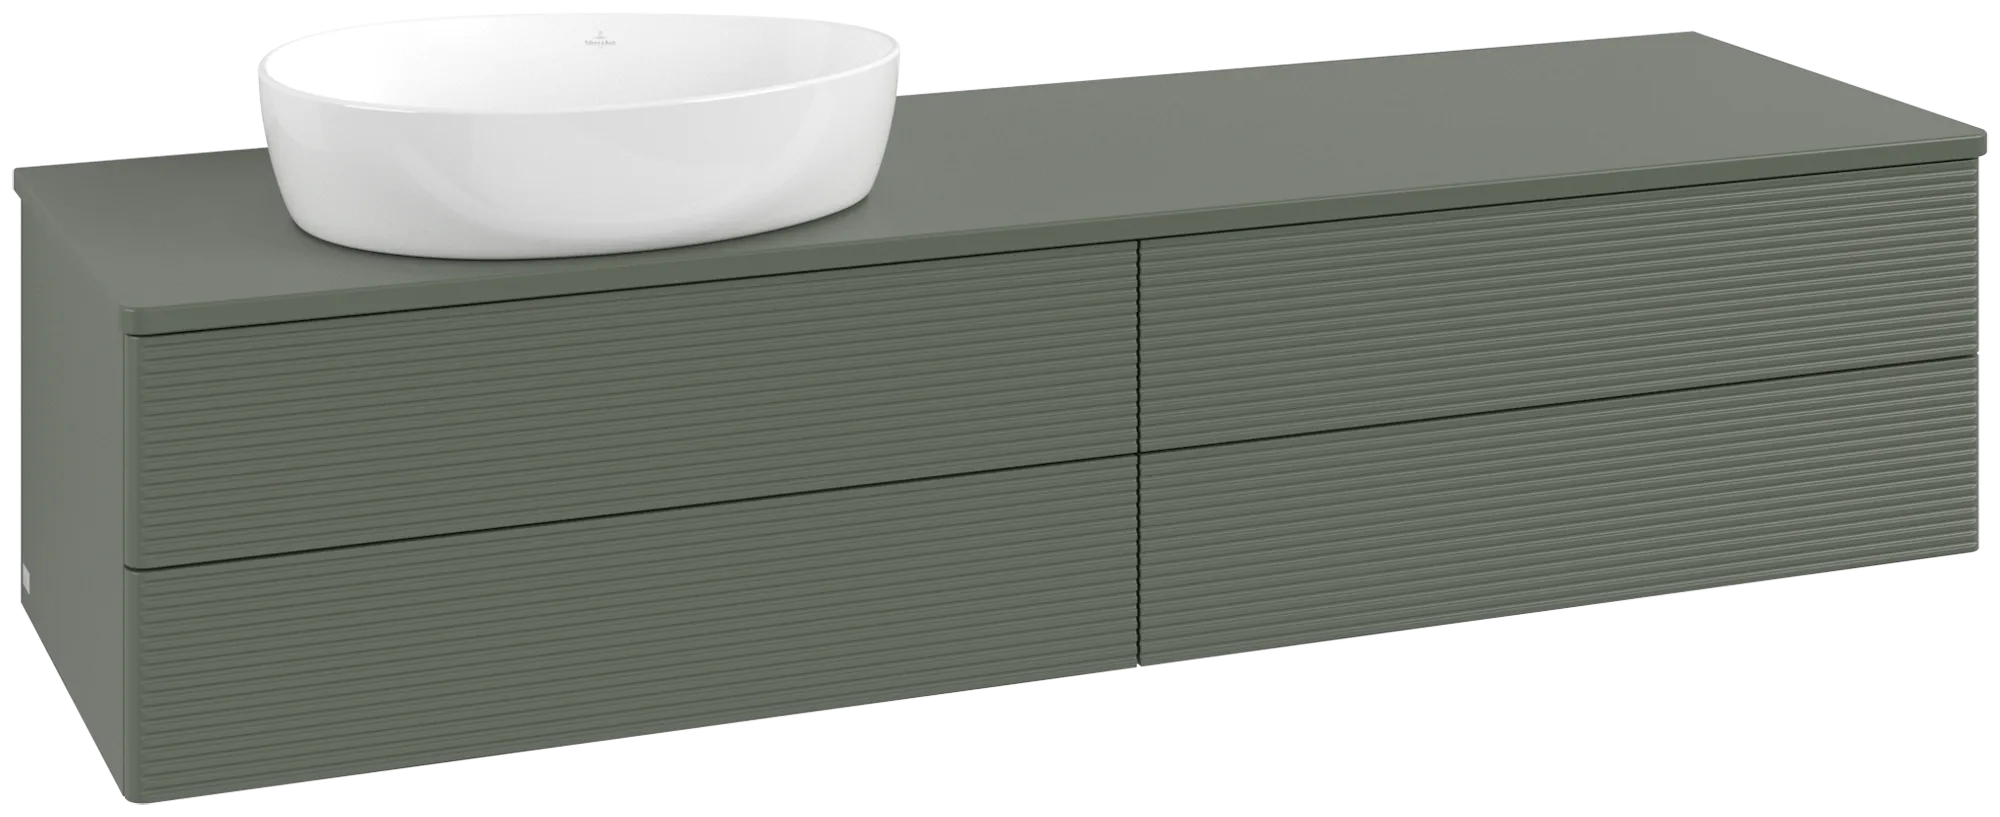 Зображення з  VILLEROY BOCH Antao Vanity unit, with lighting, 4 pull-out compartments, 1600 x 360 x 500 mm, Front with grain texture, Leaf Green Matt Lacquer / Leaf Green Matt Lacquer #L26110HL